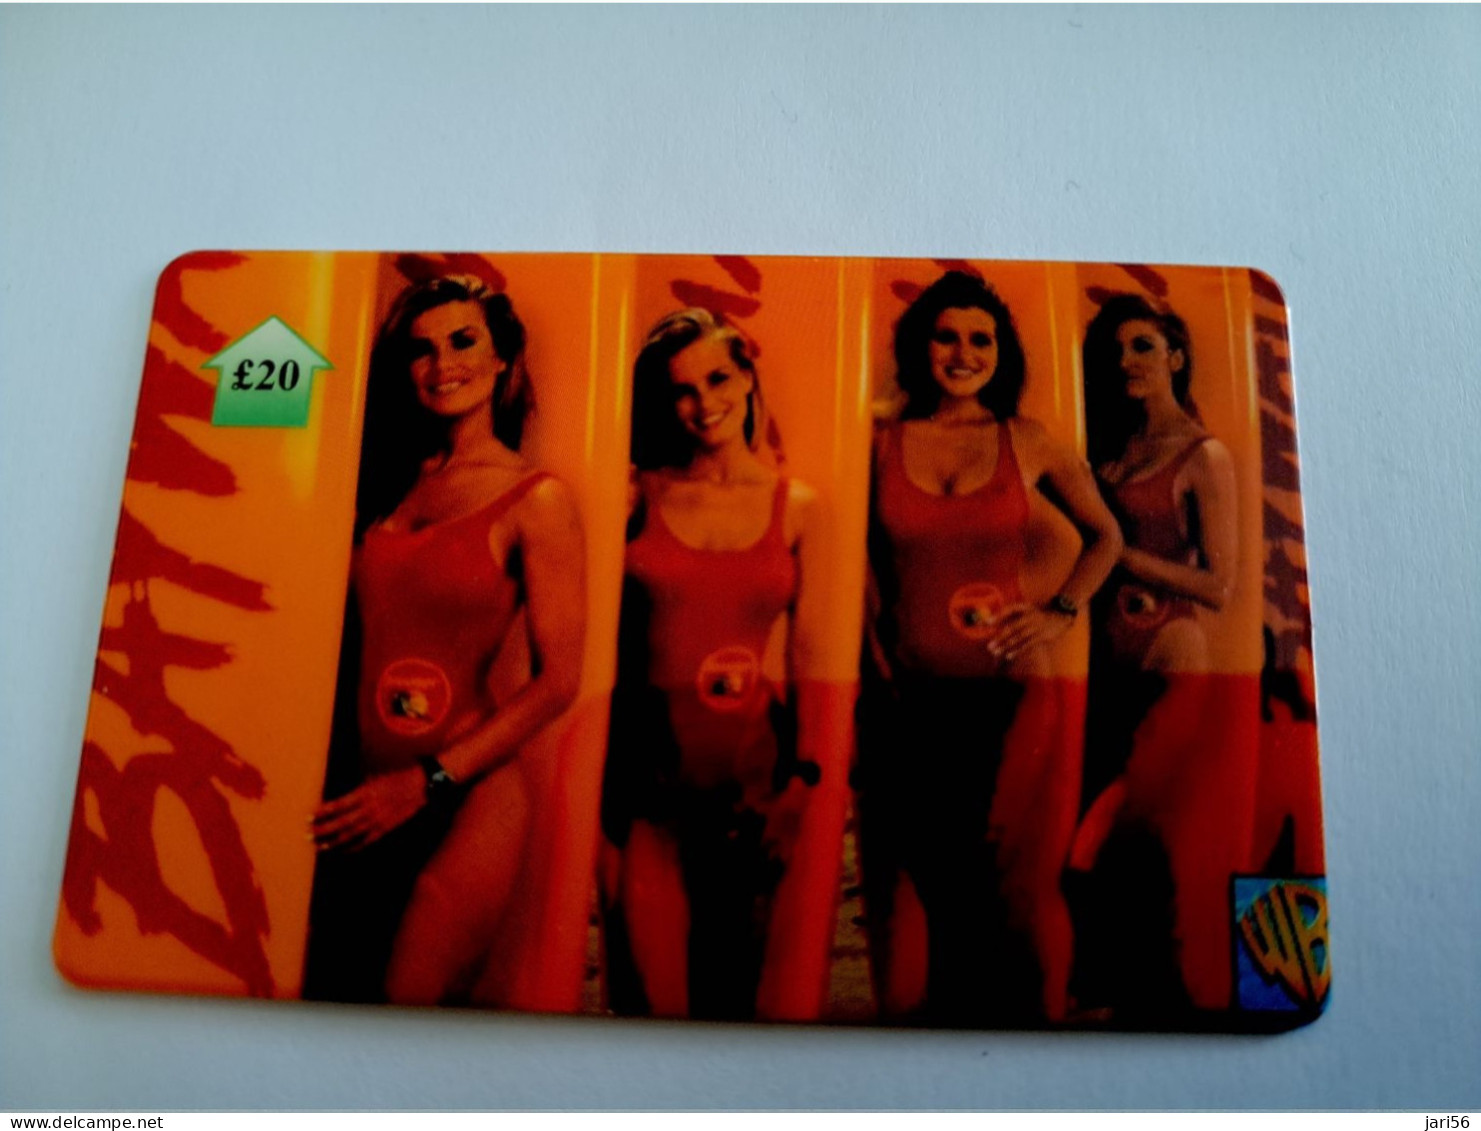 GREAT BRITAIN / 20 POUND /MAGSTRIPE  / BAYWATCH PHONECARD/ LIMITED EDITION/ ONLY 500 EX     **15684** - Verzamelingen